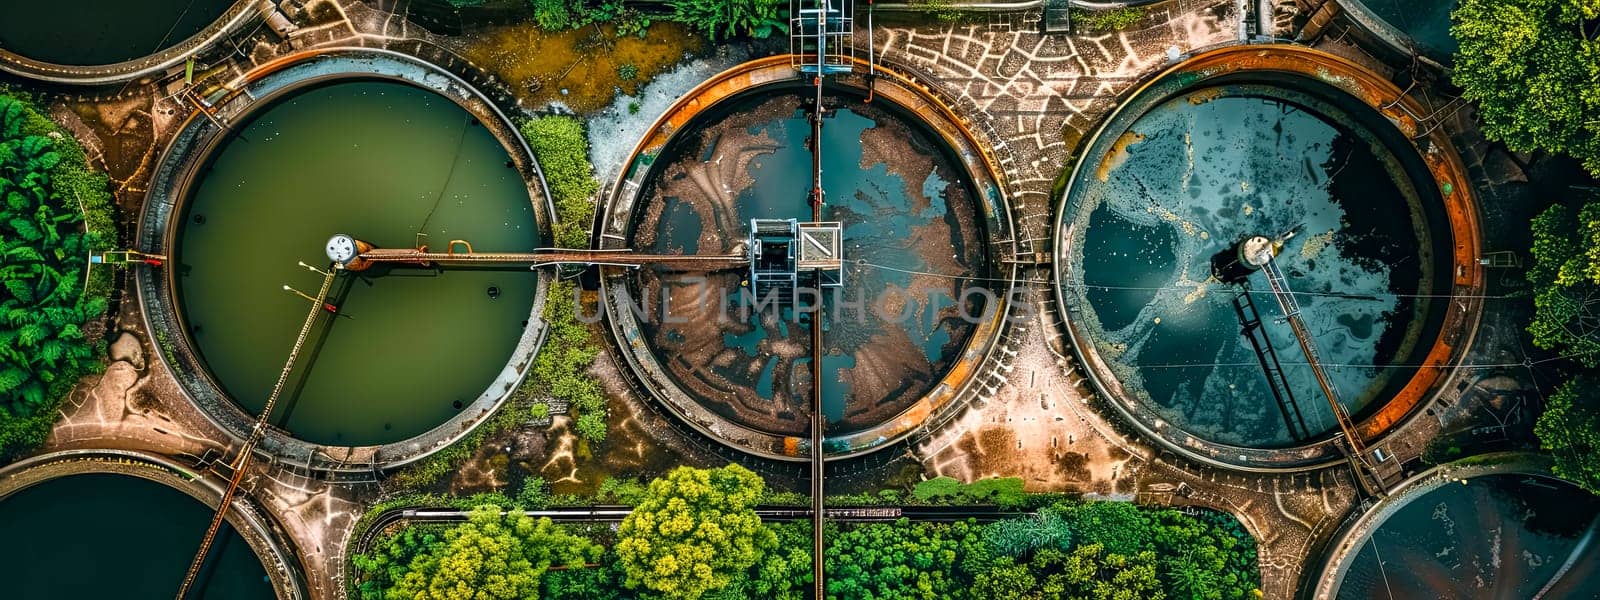 Aerial view of water treatment plant by Edophoto